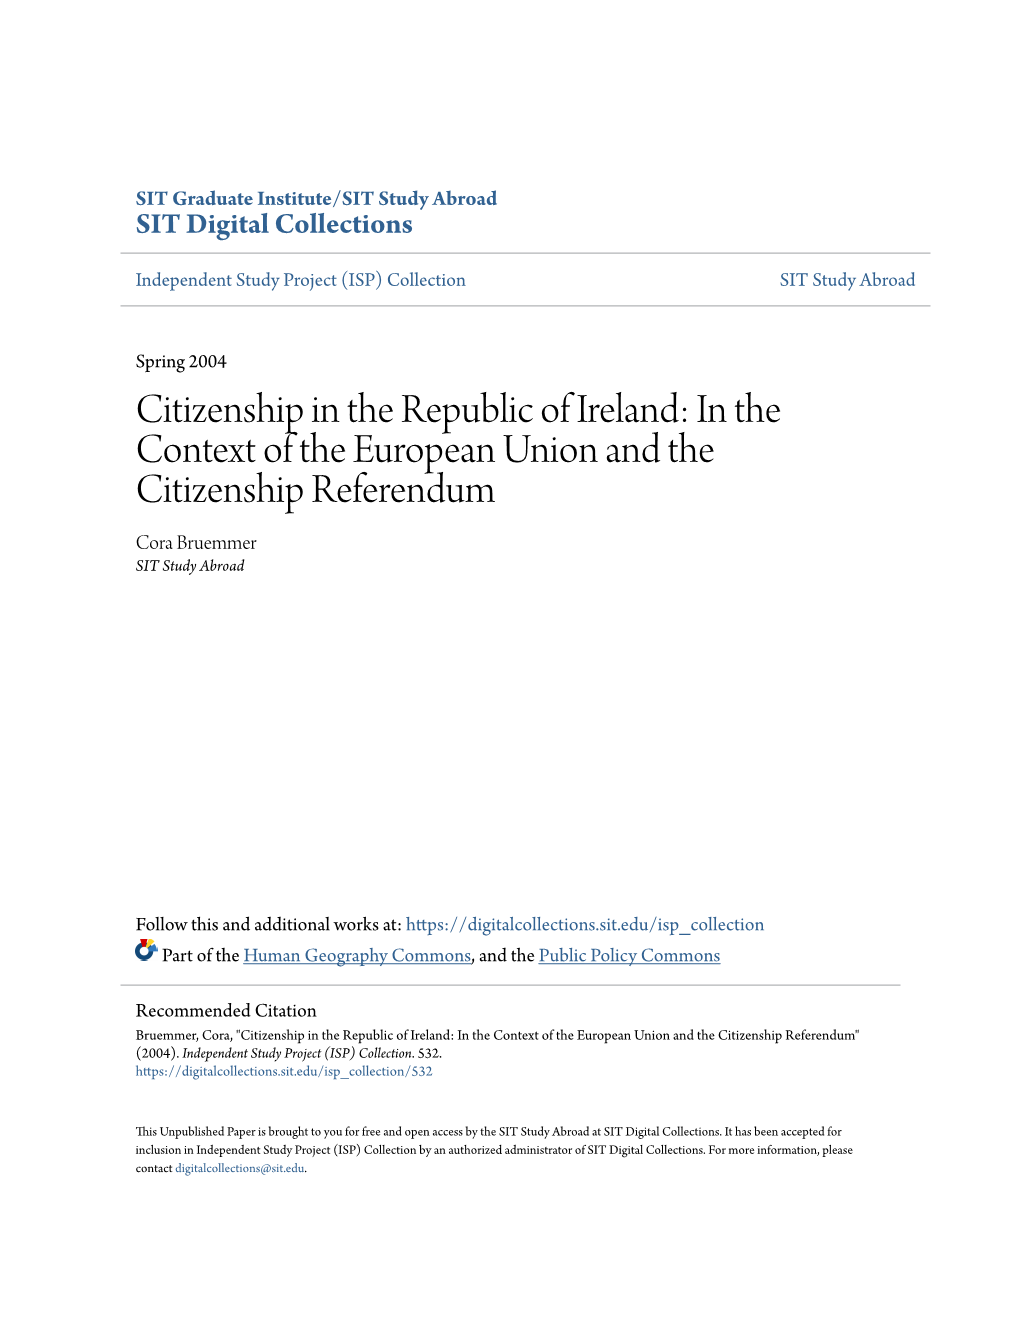 Citizenship in the Republic of Ireland: in the Context of the European Union and the Citizenship Referendum Cora Bruemmer SIT Study Abroad